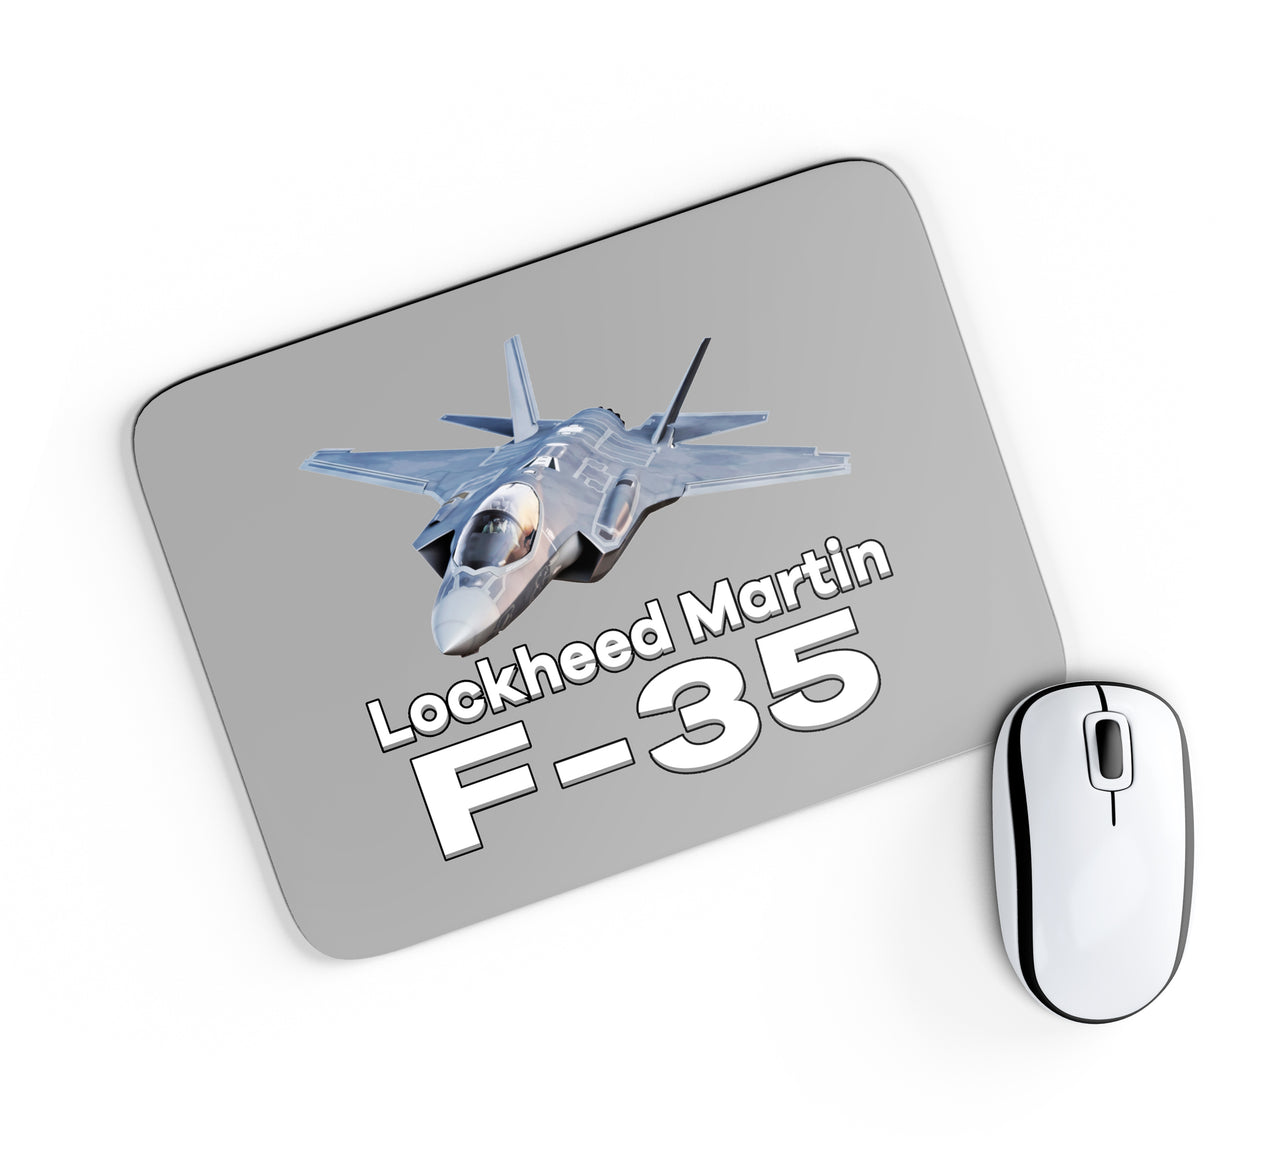 The Lockheed Martin F35 Designed Mouse Pads